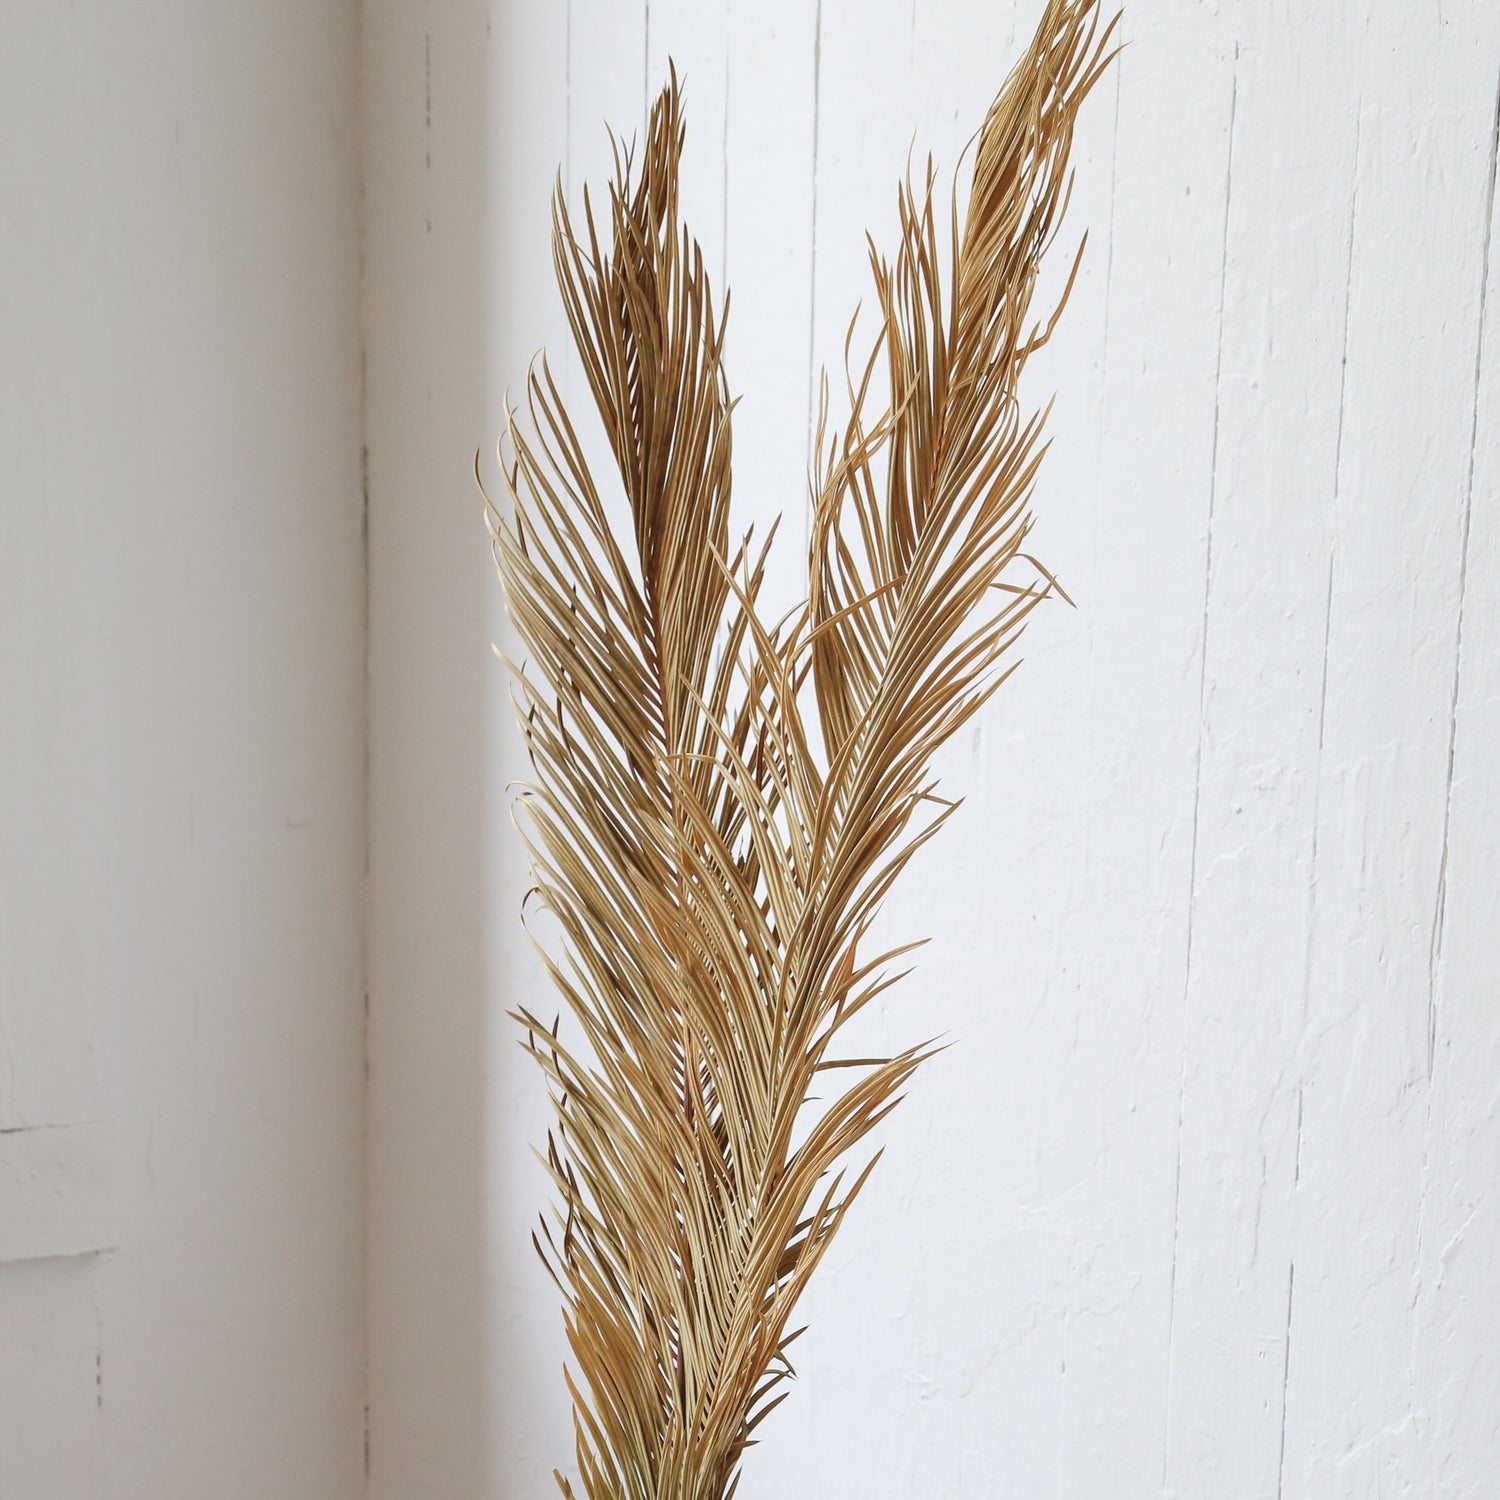 Dried sago palm leaf available at Rook and Rose.